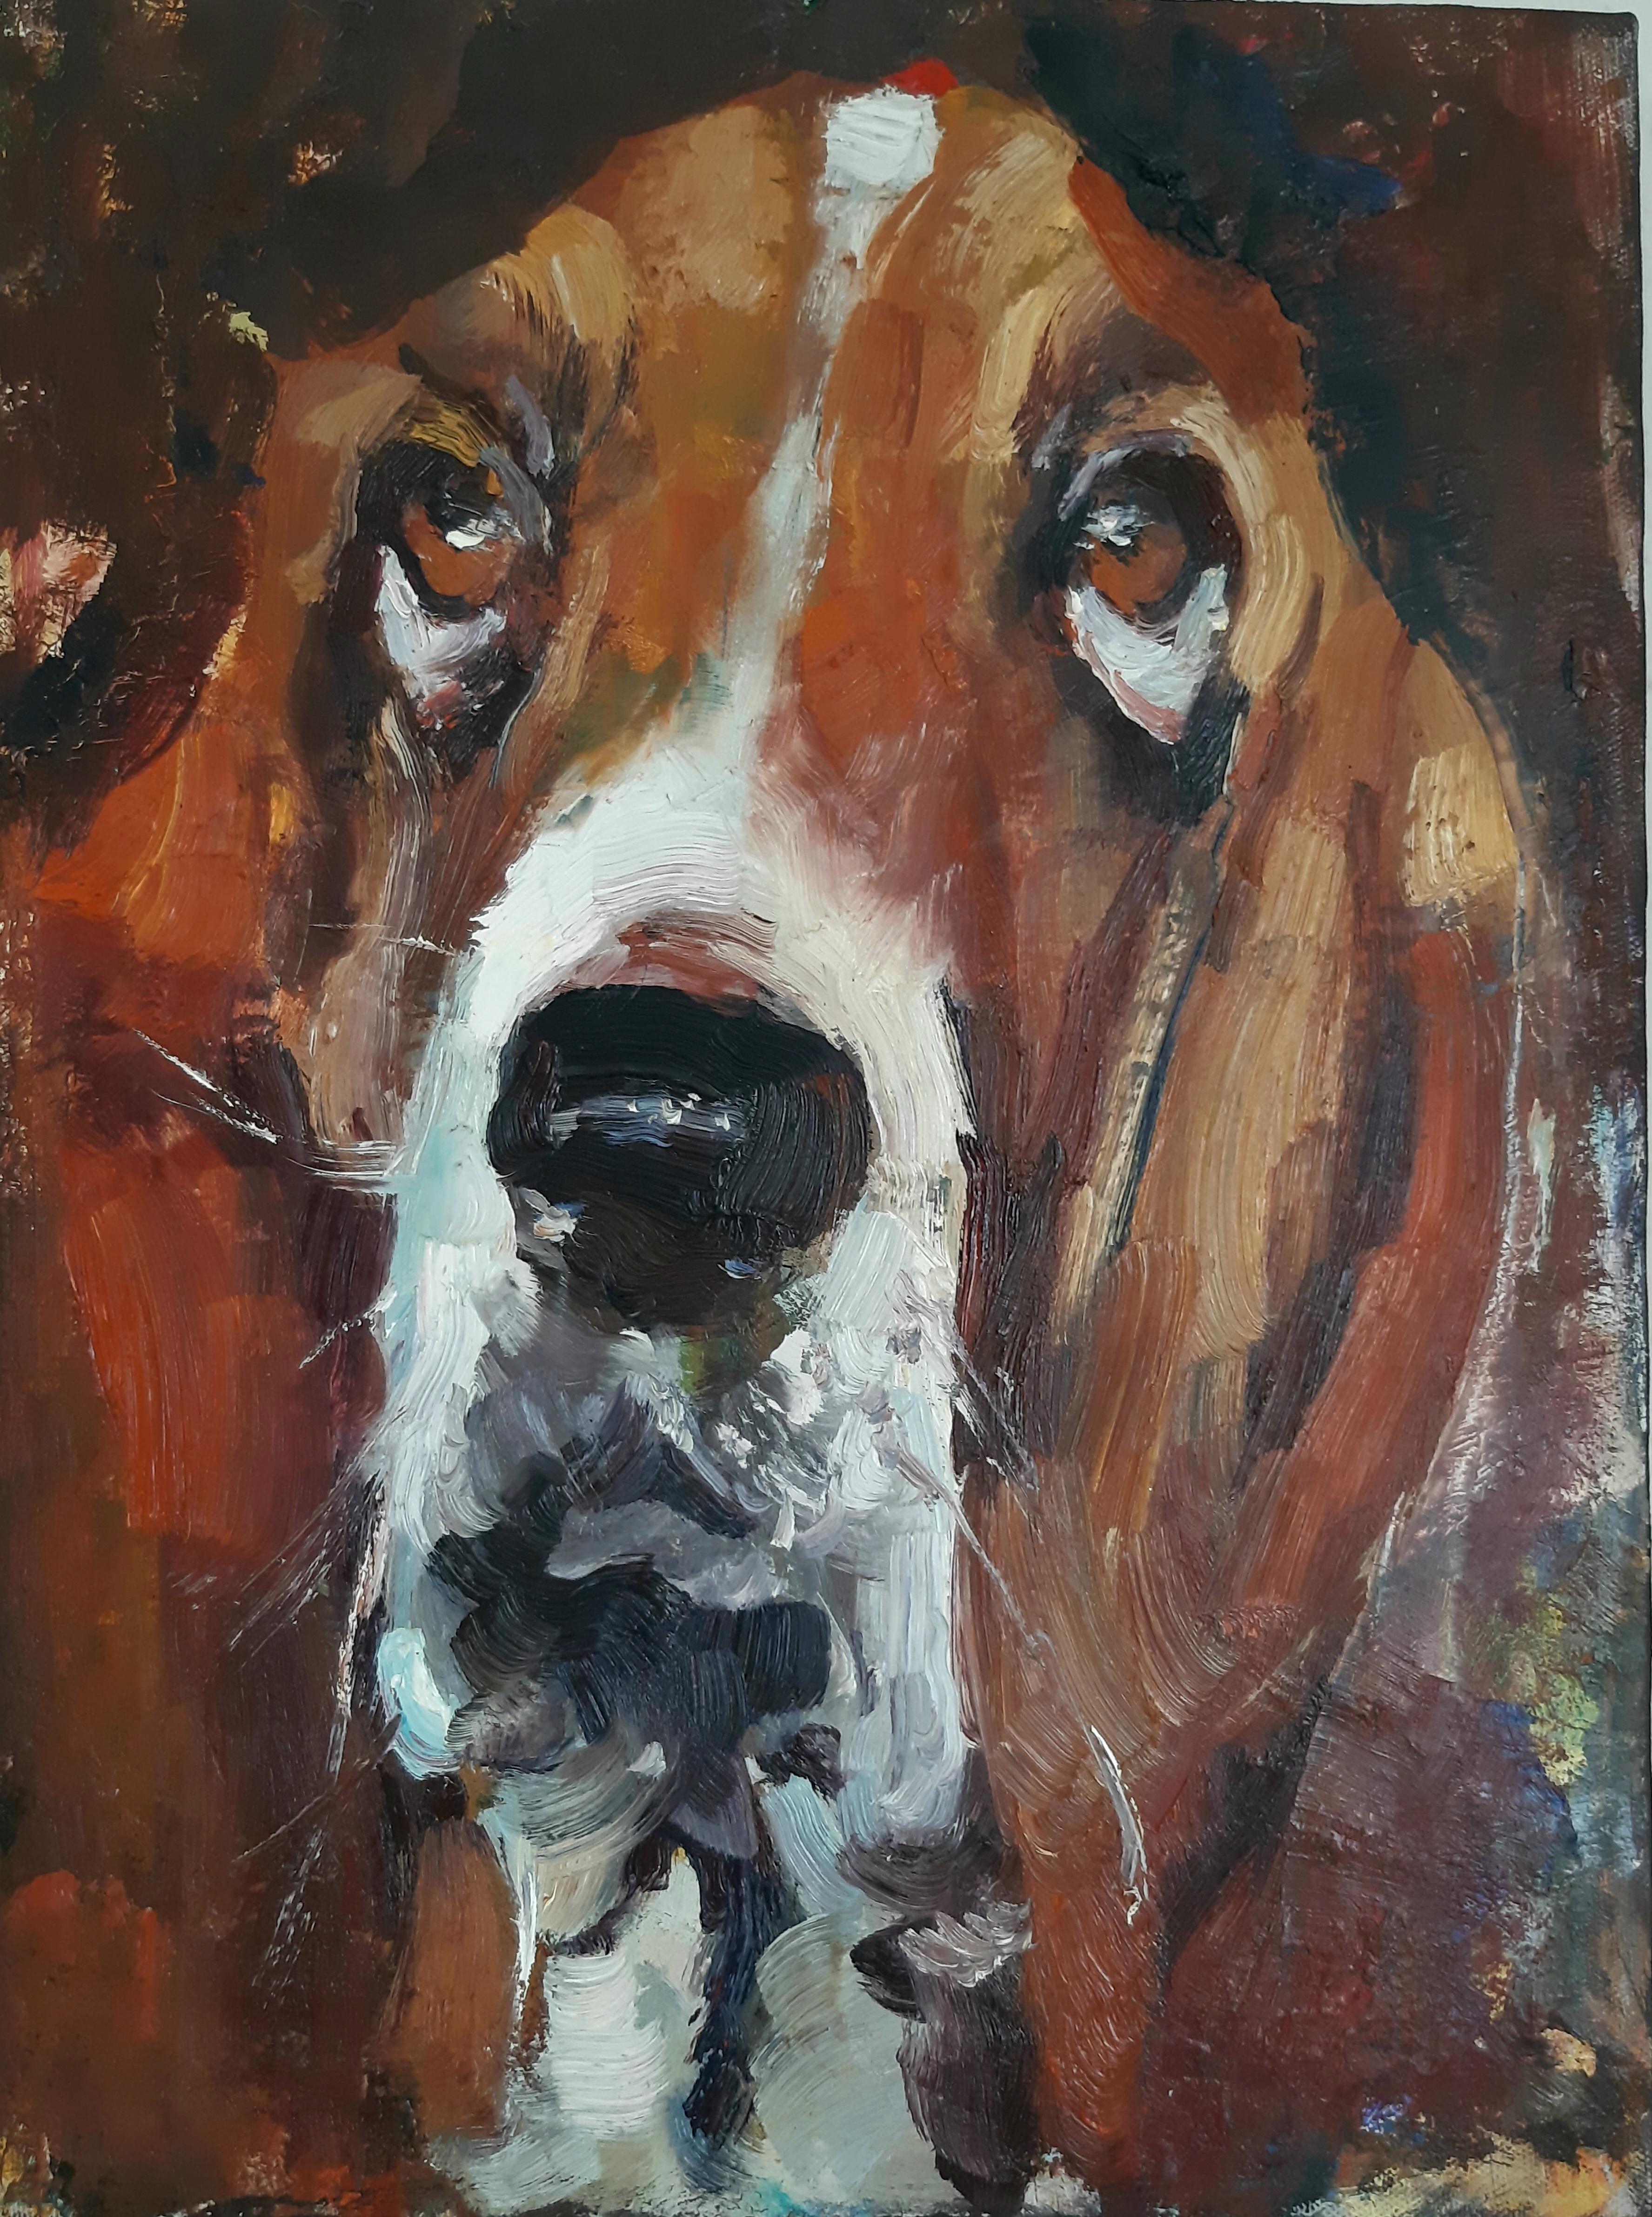 "Enchantment of the Gaze: Portrait of a Basset Hound Reflecting Inner Emotions"